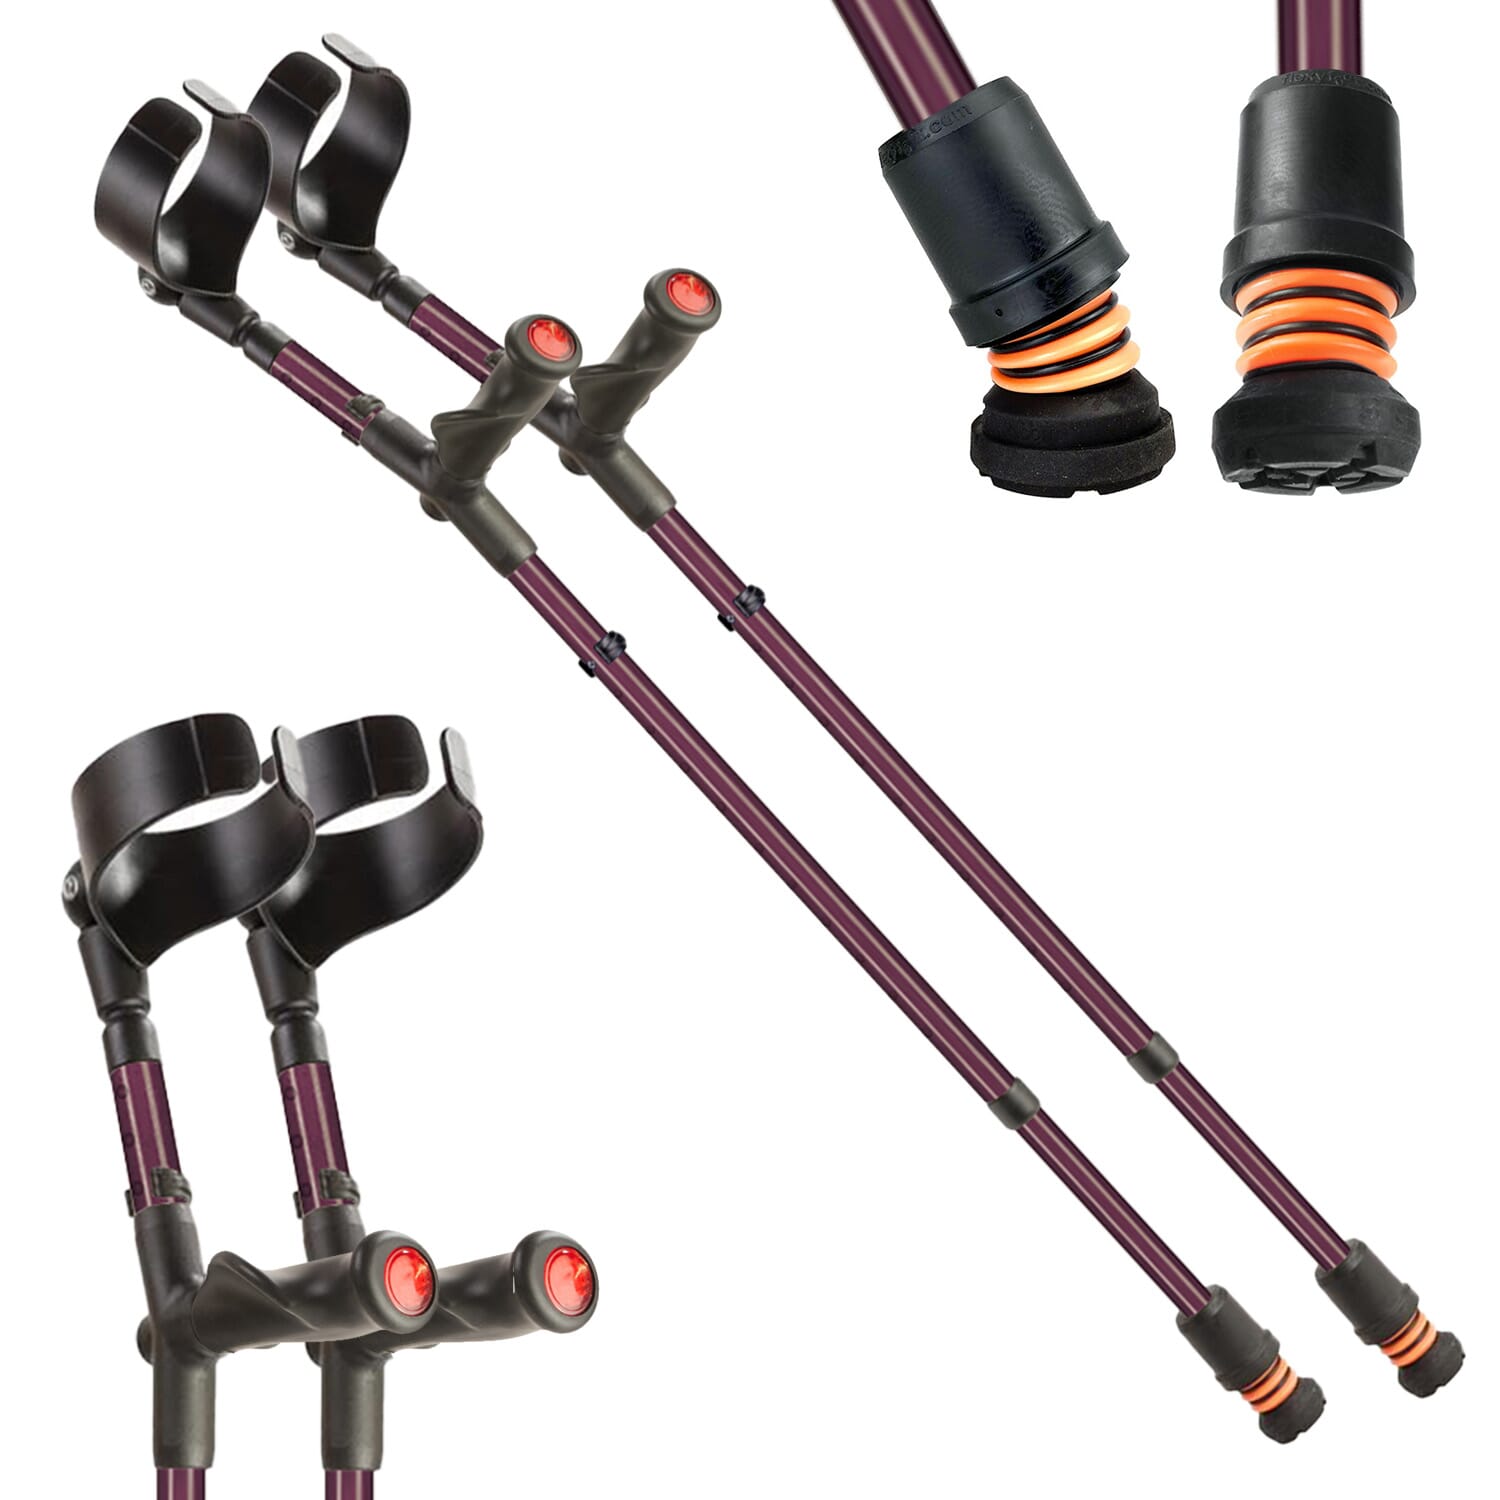 View Flexyfoot Comfort Grip Double Adjustable Crutches Blackberry Pair information